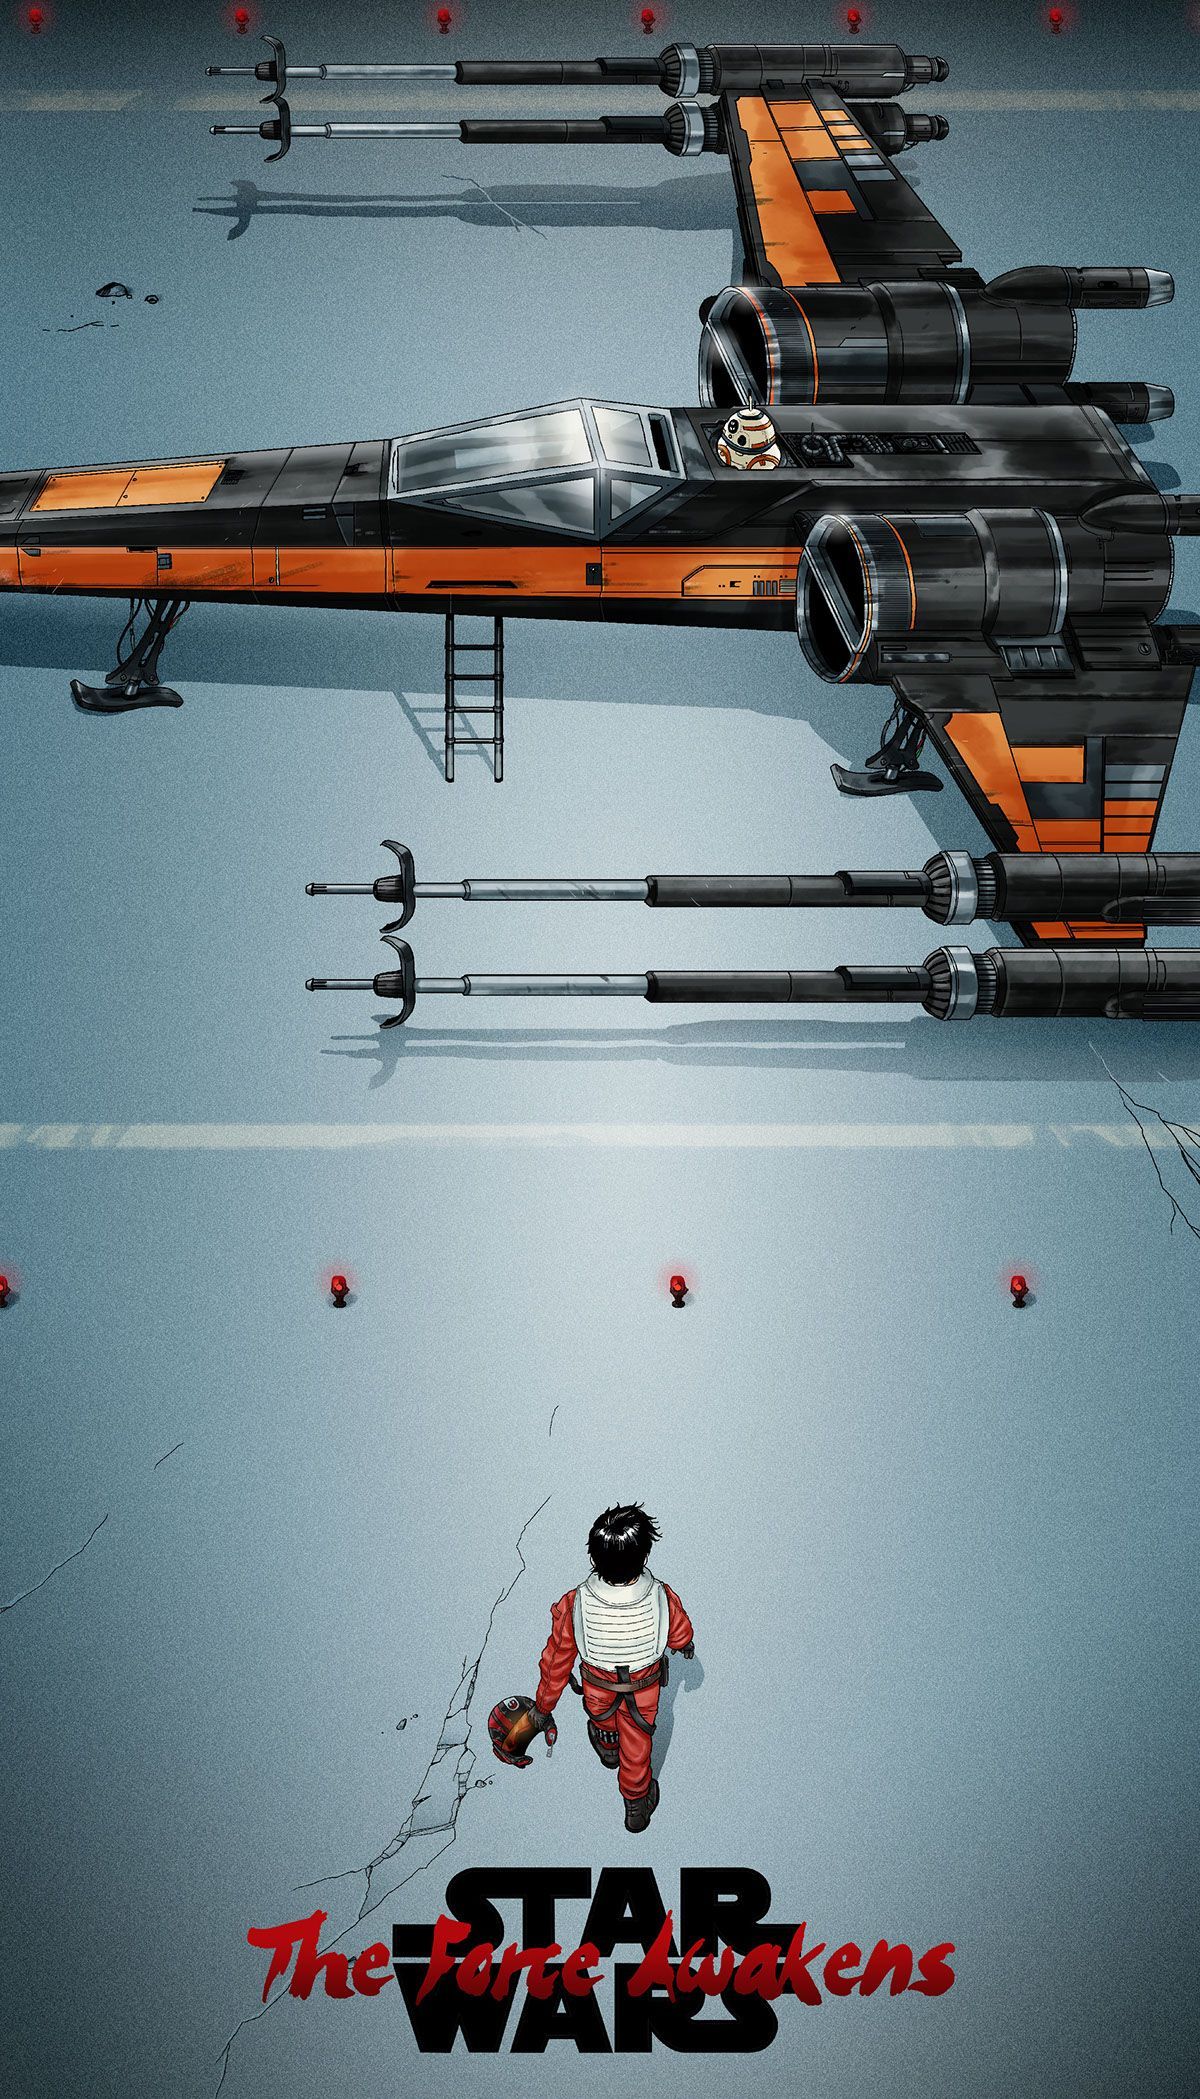 Poe Dameron Approaches His X Wing. Star Wars: The Force Awakens. Star Wars Wallpaper, Star Wars Ships, Star Wars Vehicles